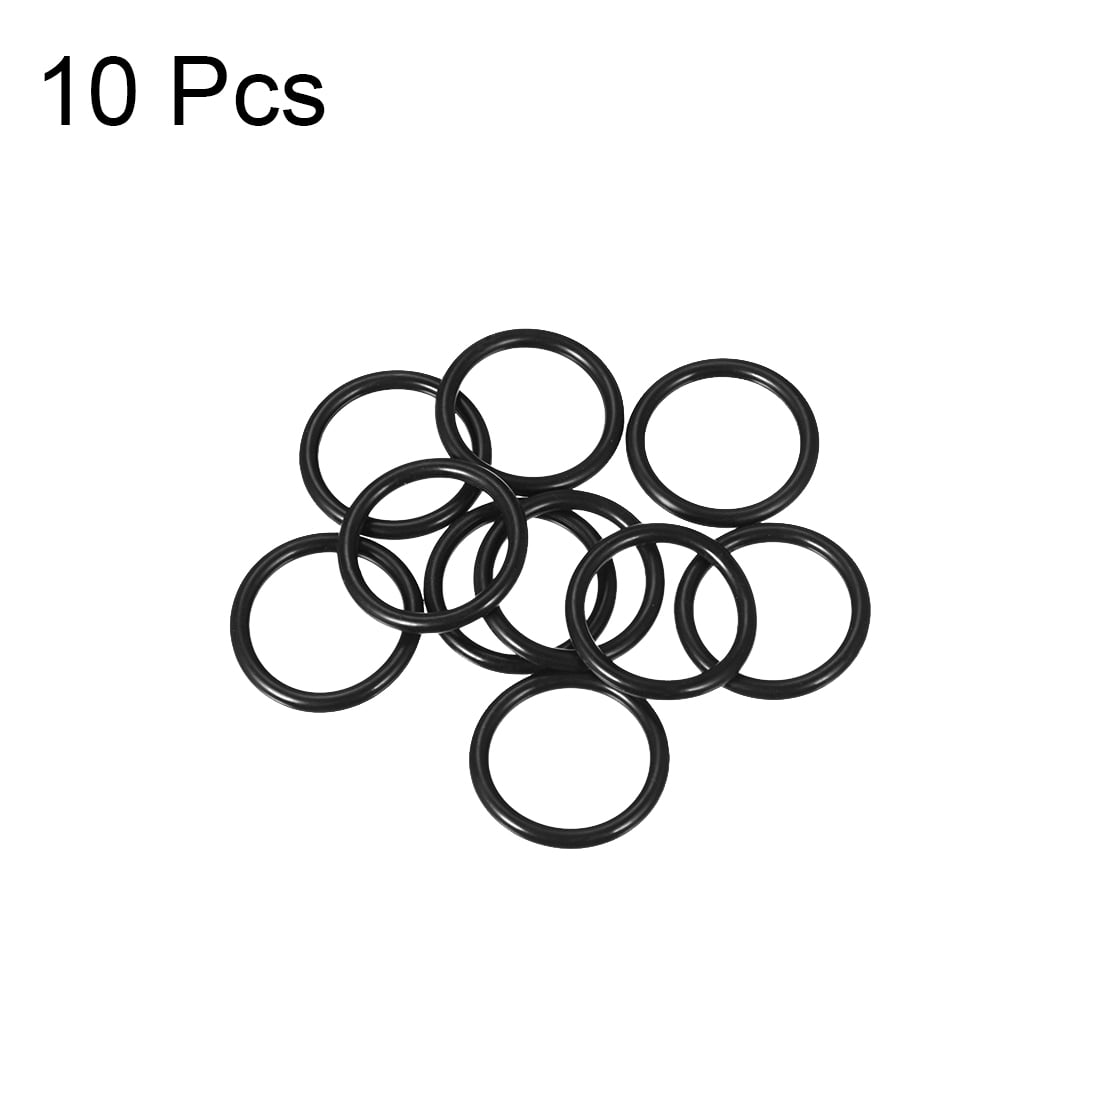 O-Ring Assortment,Universal O-Ring Kit,100 Pcs O-Ring Seal with Rubber for Car repair,Hydraulics,Pressure washer,RC models,Sink faucets 